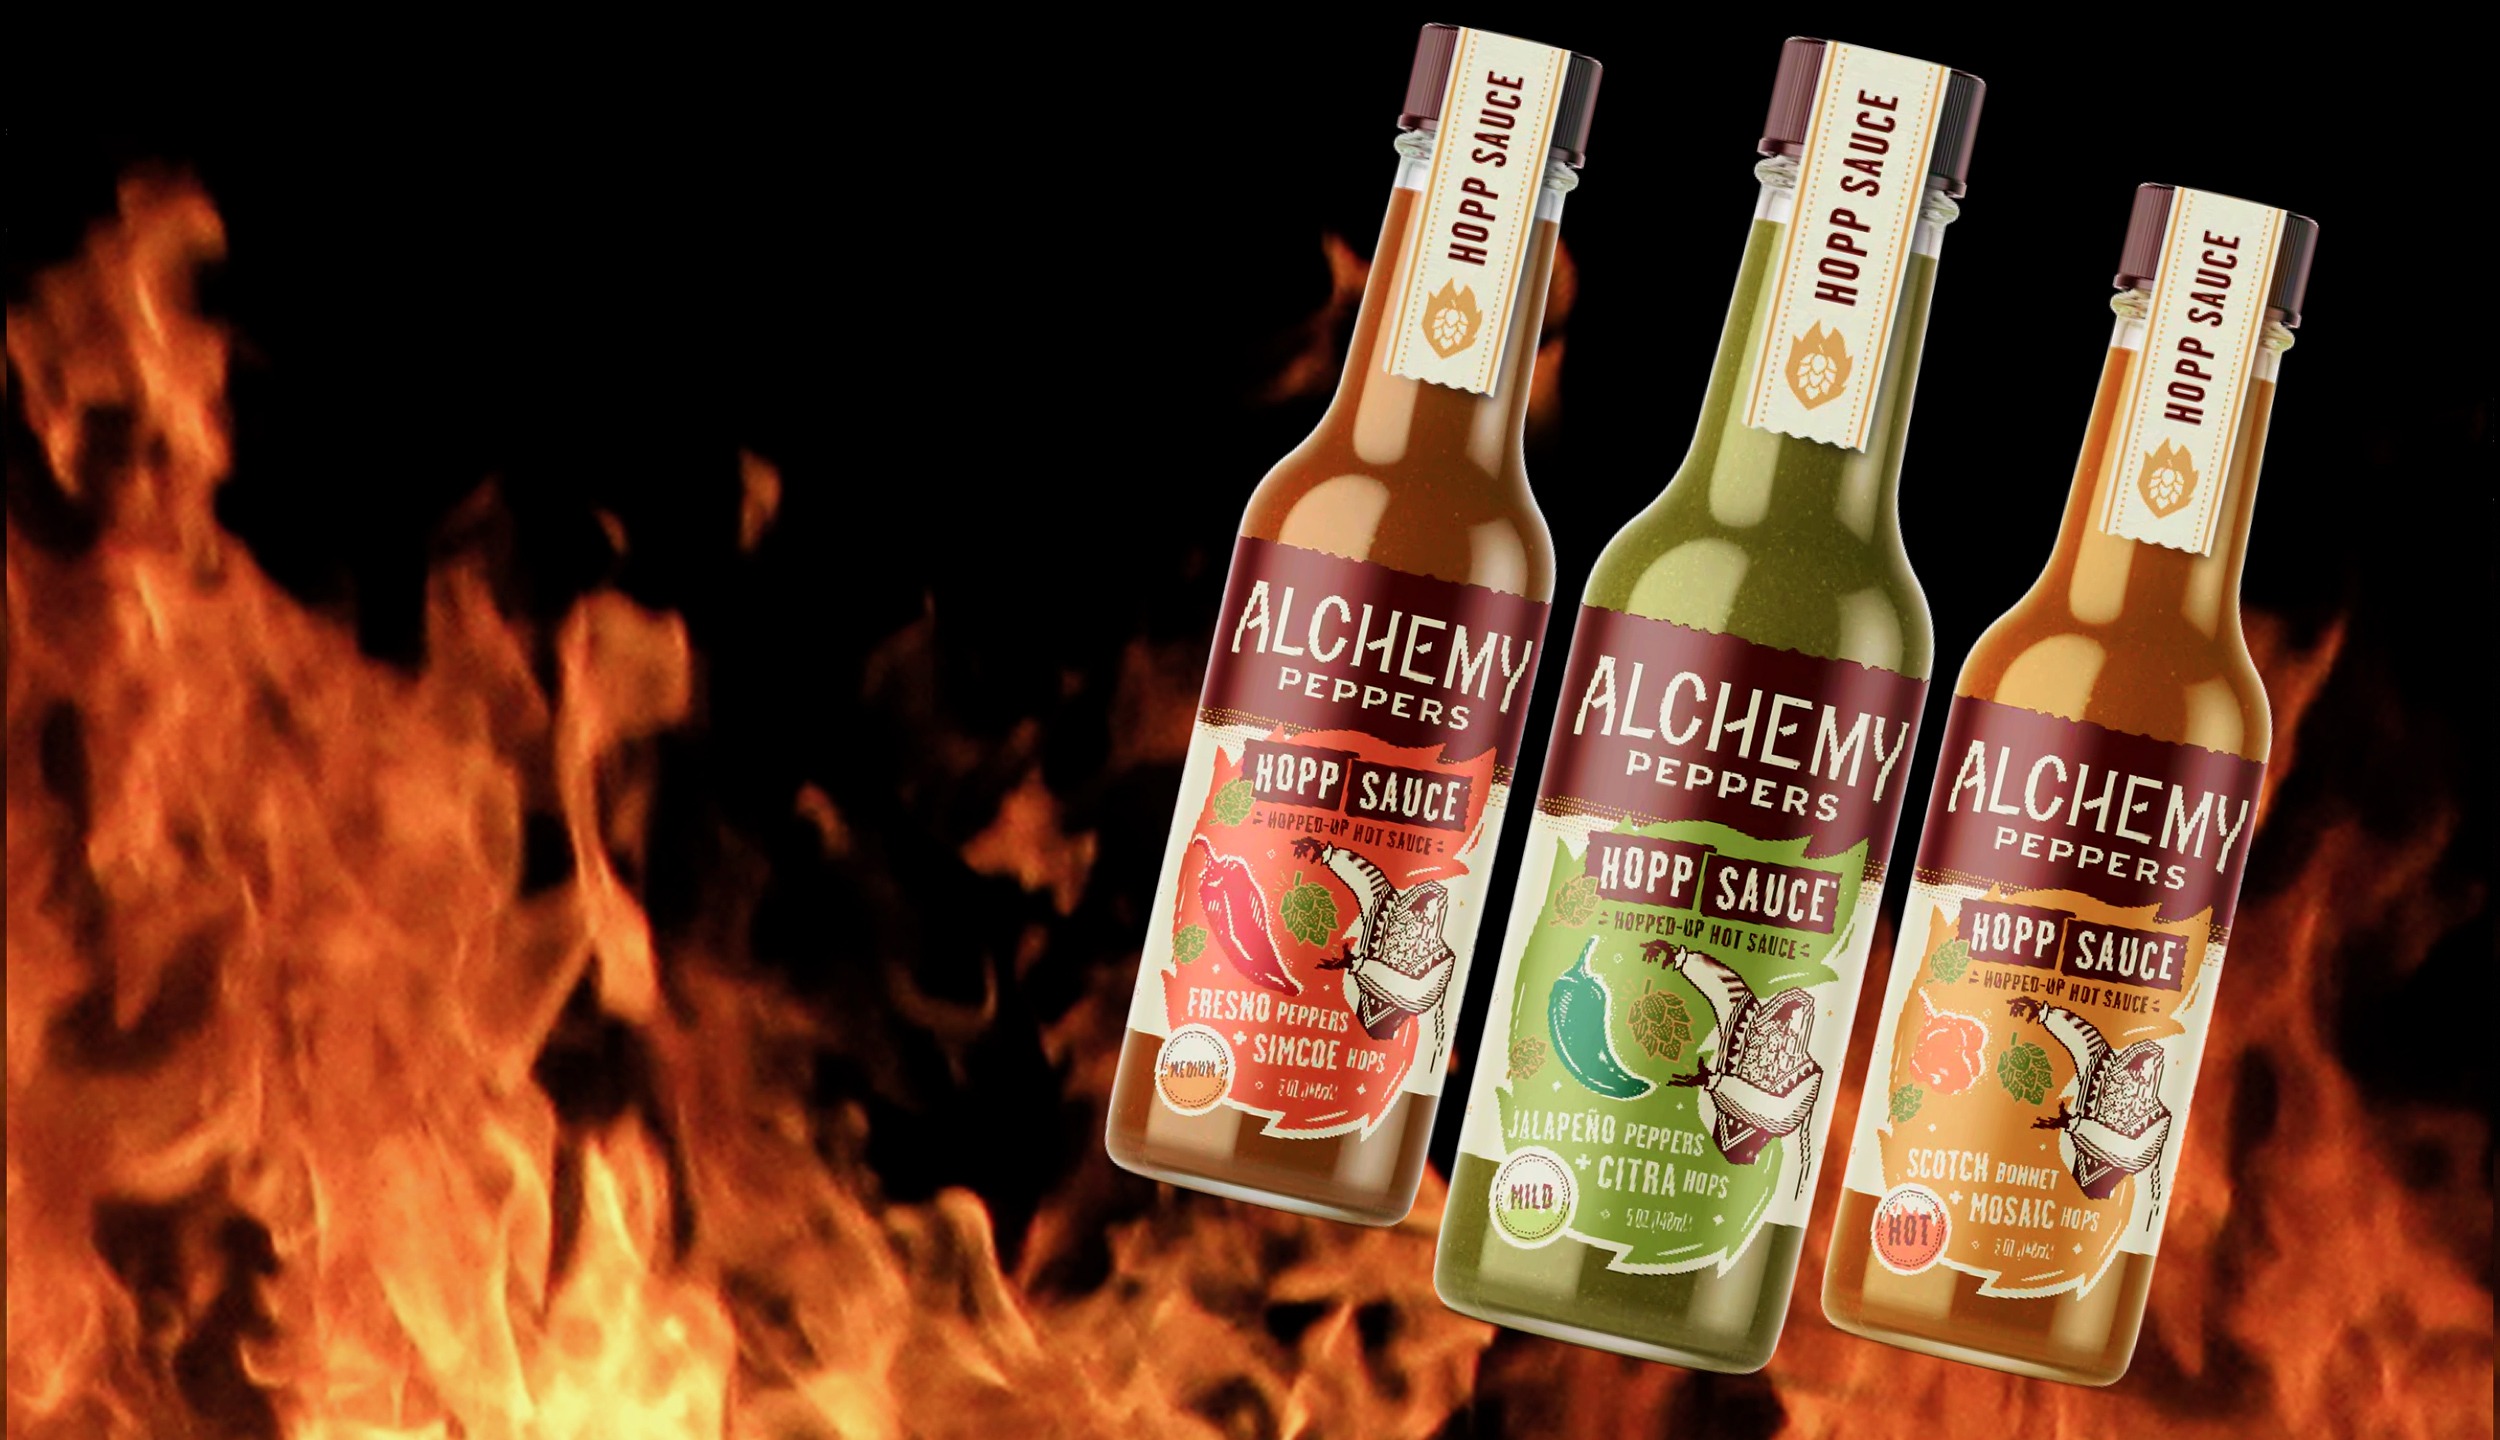 Three bottles of Alchemy Peppers hopp sauce with a fire design in the background